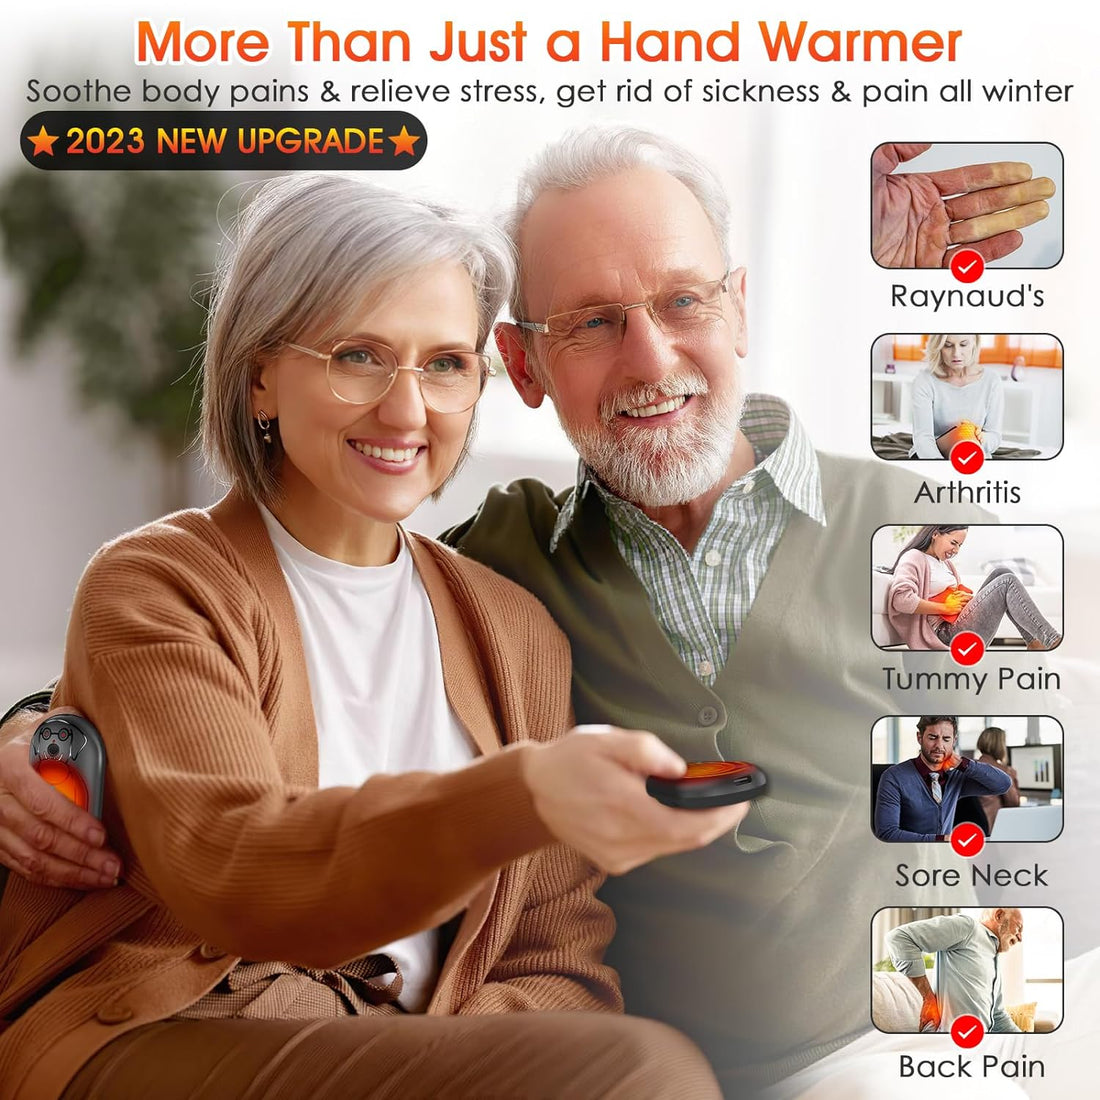 2 Pack Rechargeable Hand Warmers Portable: Aleath Warm Gifts for Outdoor Hunting Camping